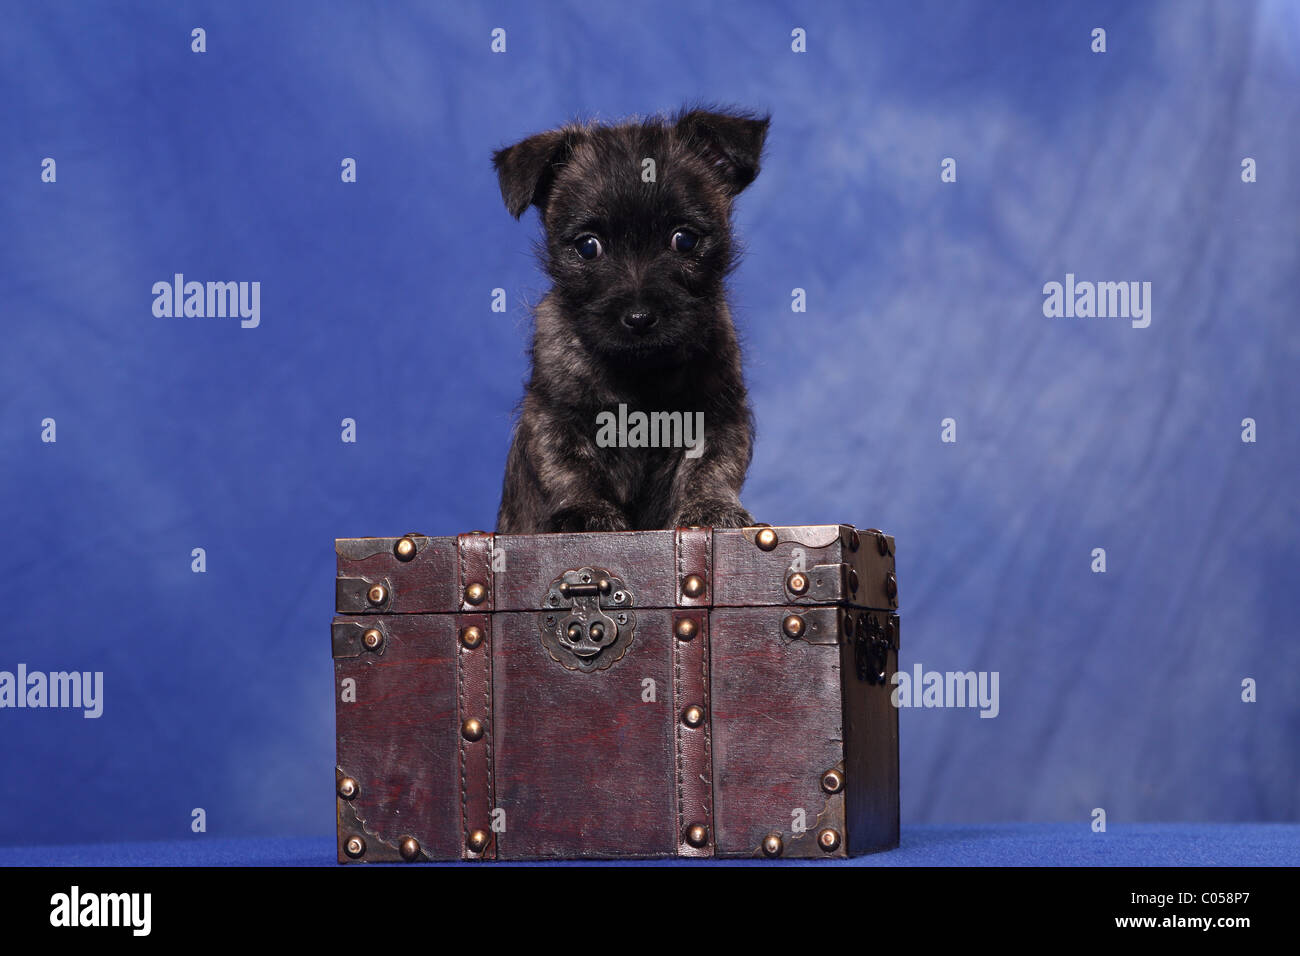 Cairn Terrier puppy Stock Photo